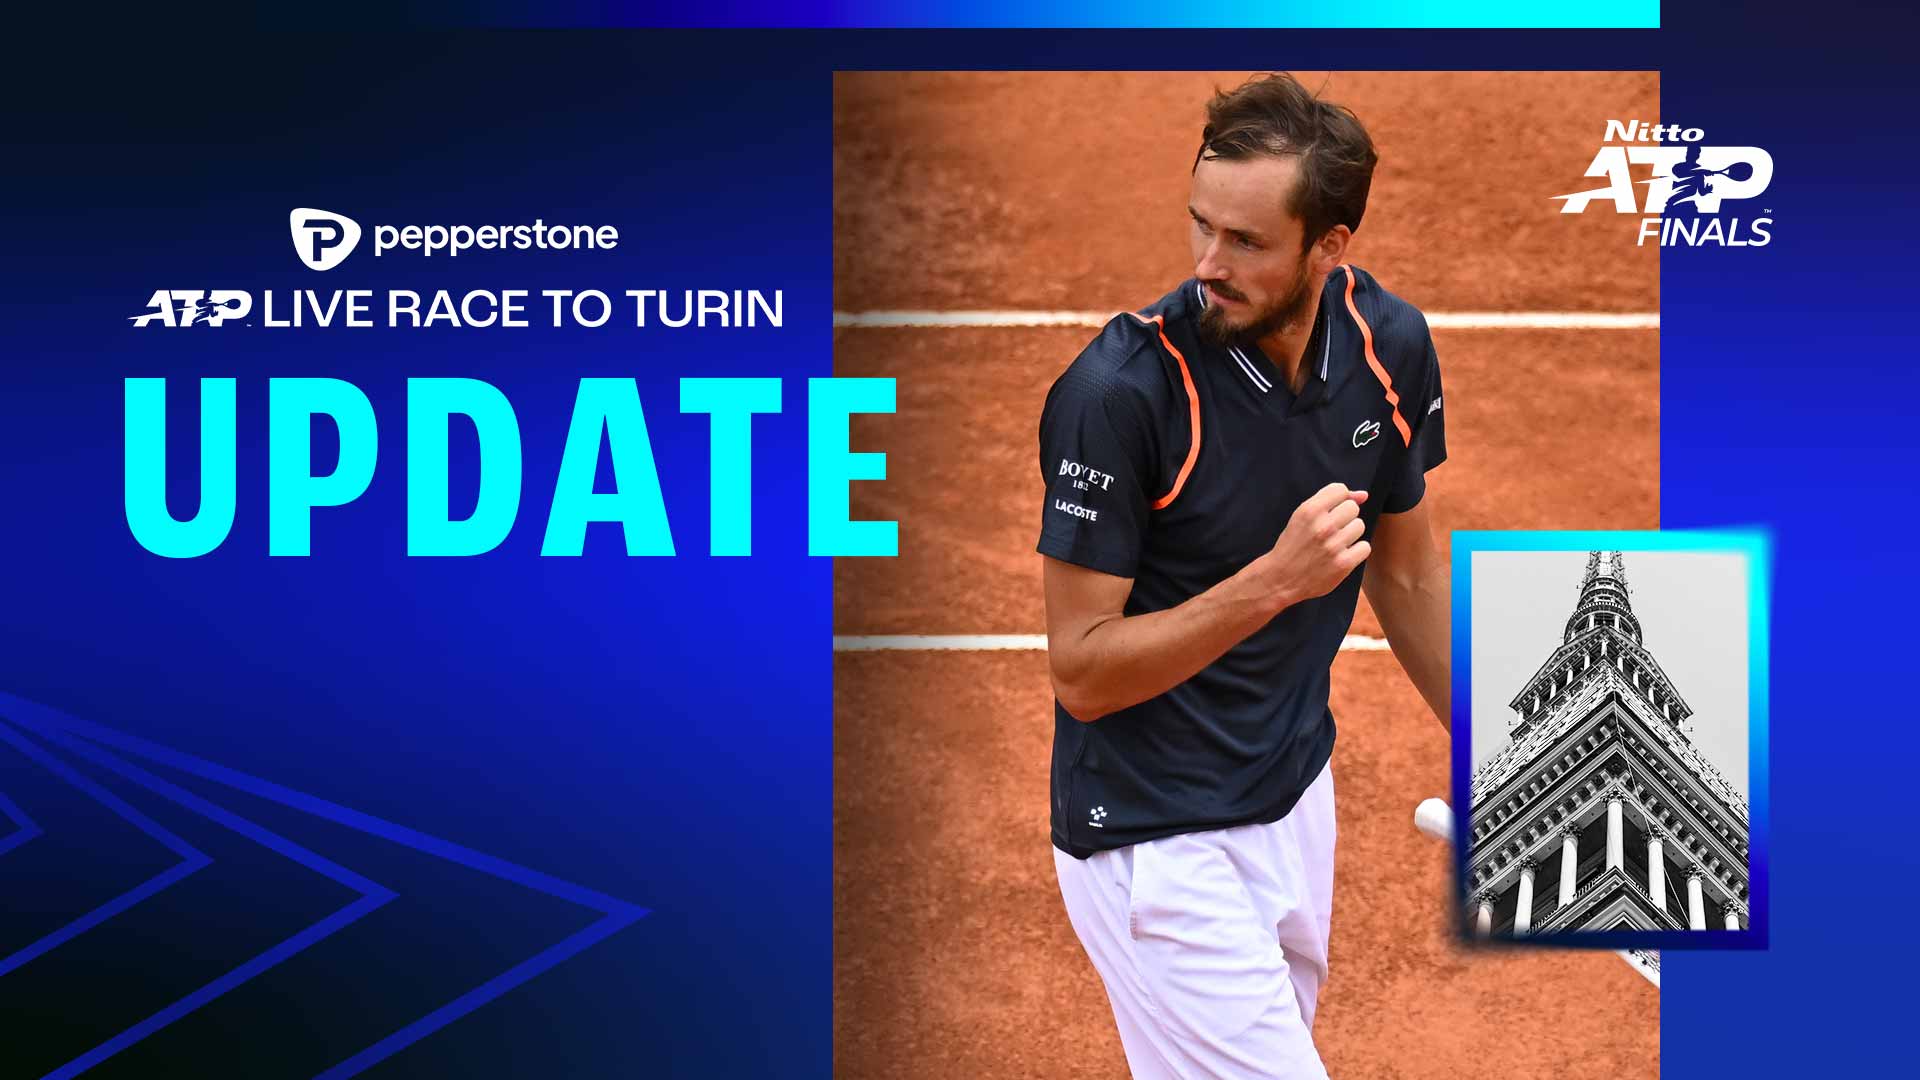 Daniil Medvedev leads the Pepperstone ATP Live Race To Turin after winning the title in Rome.